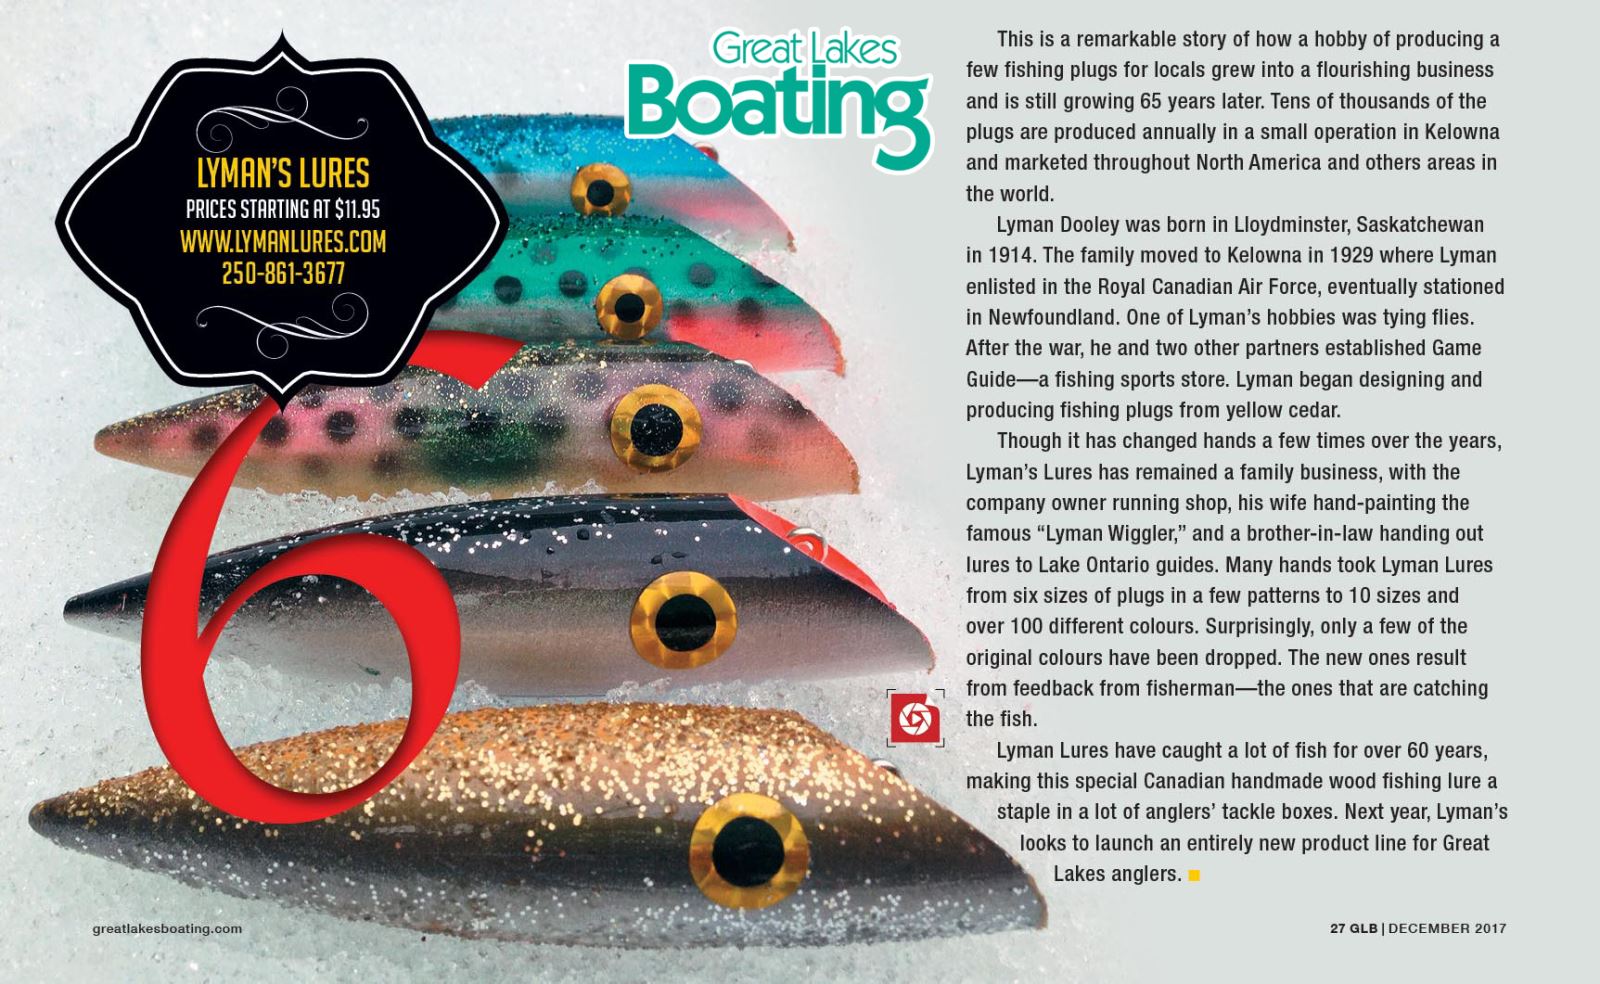 GiftGuide: Lyman's Lures Tradition of hand-painted wooden lures